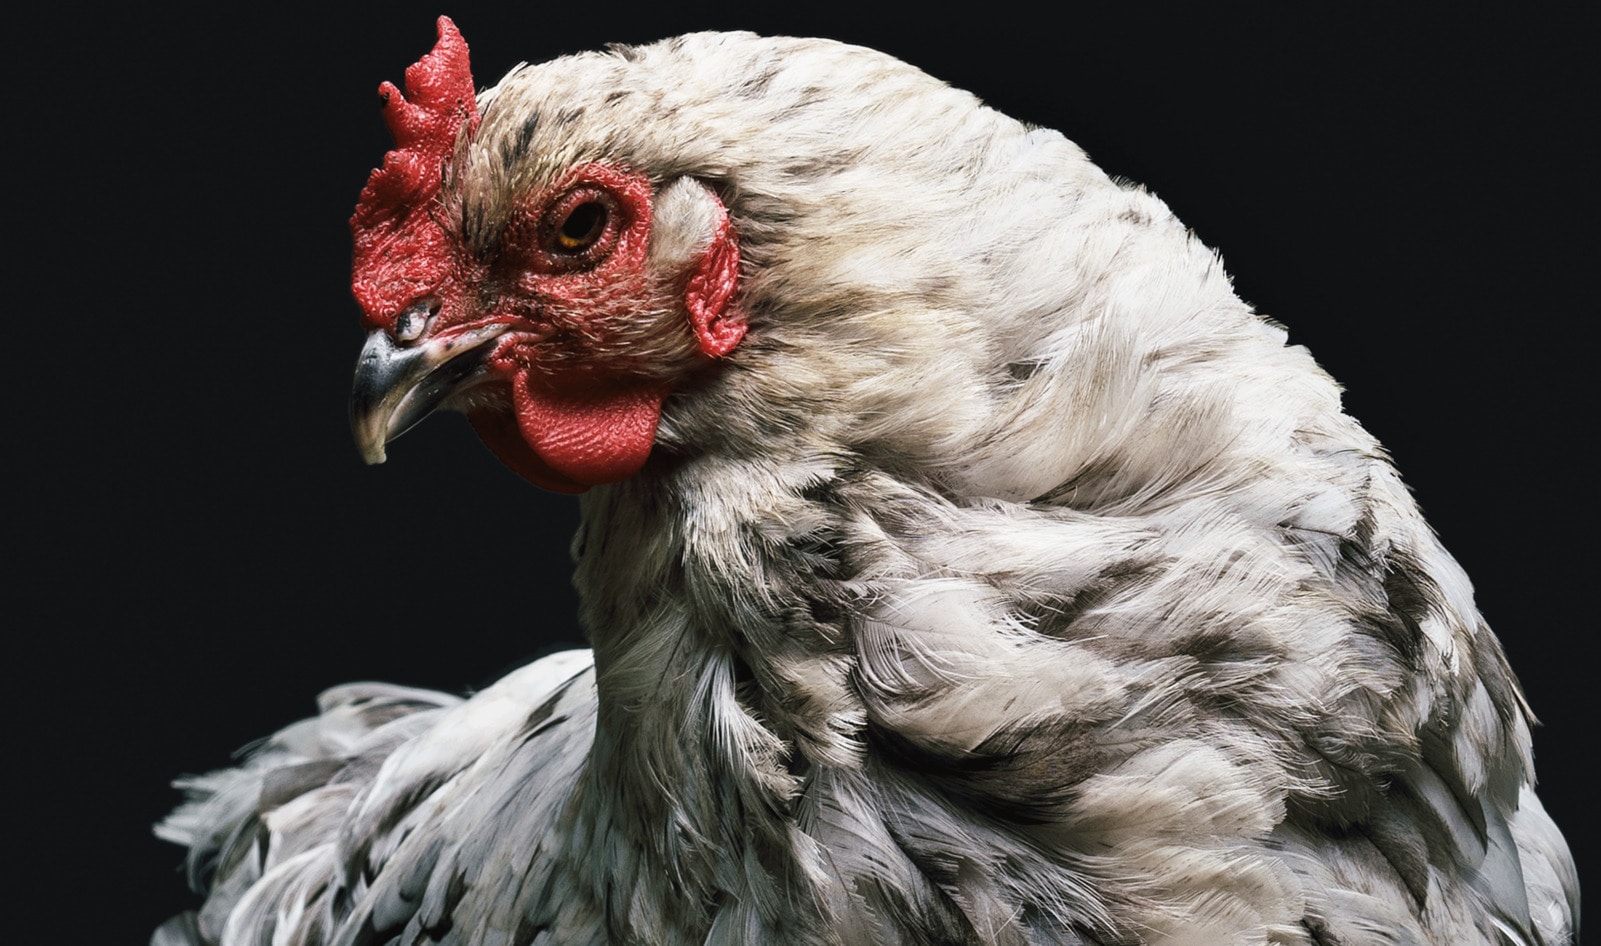 99.9 Percent of Chickens in US Are Factory Farmed&nbsp;